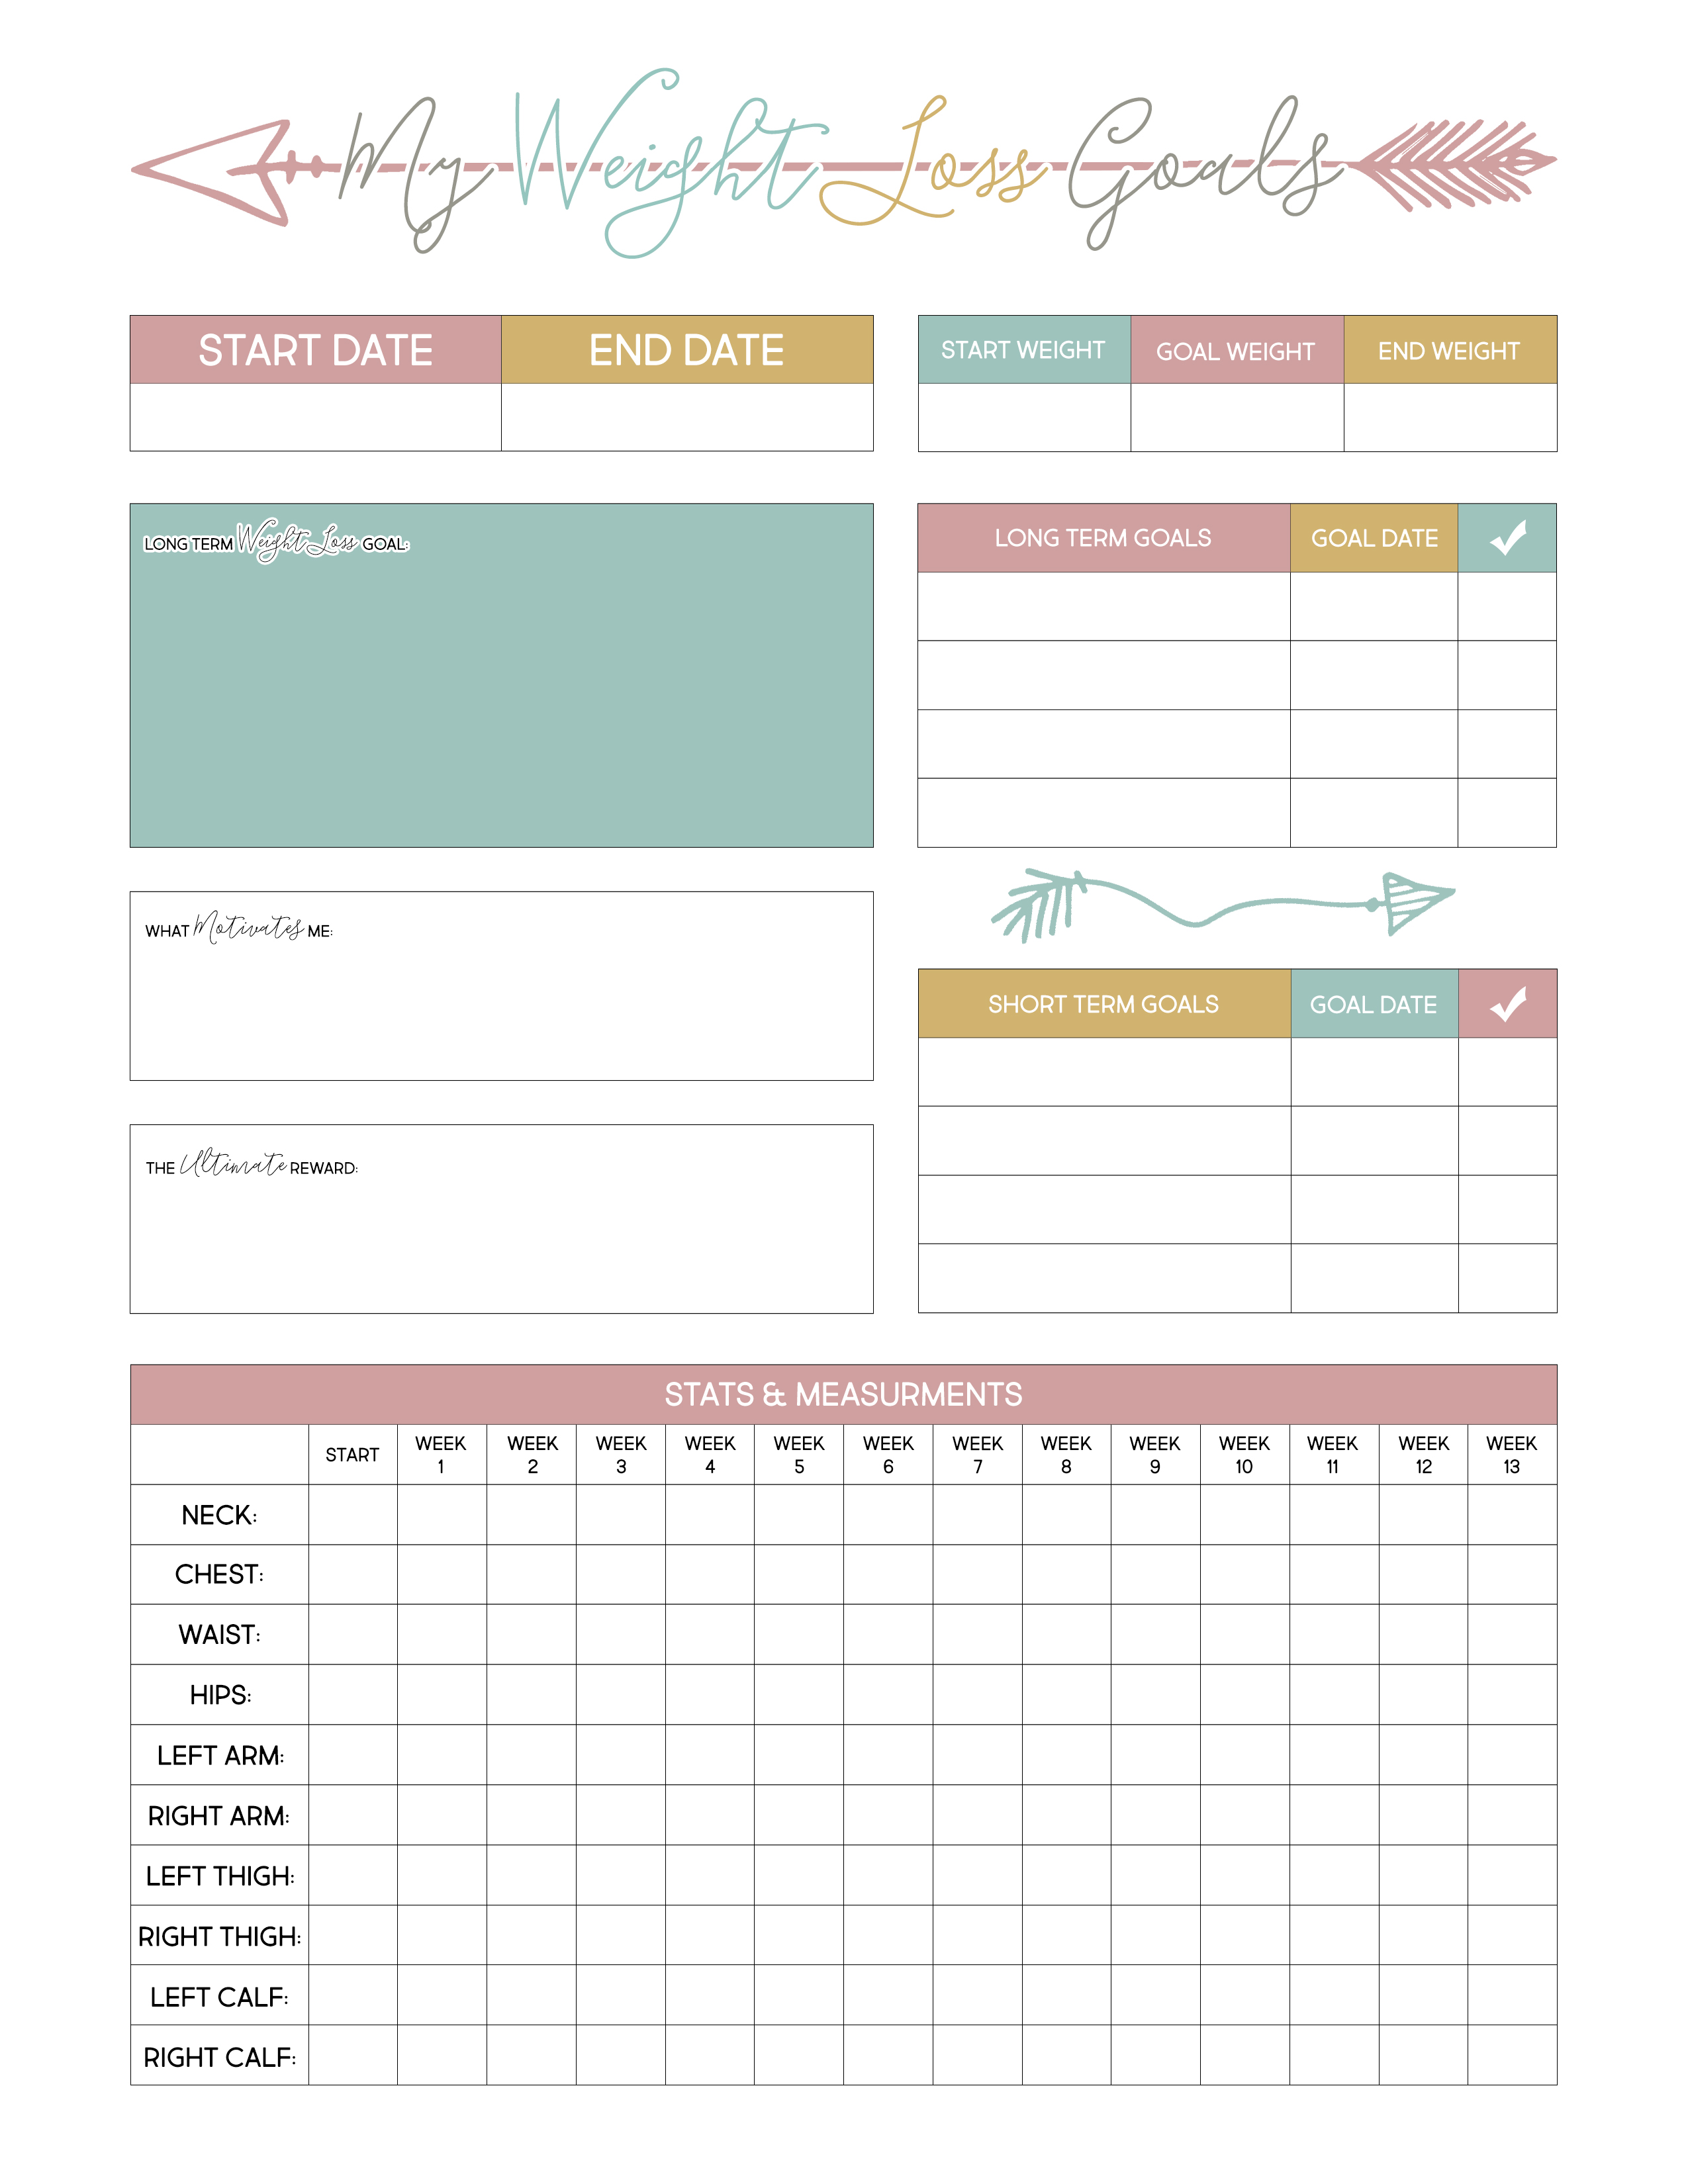 Free Printable Weight Loss Planner   The Cottage Market